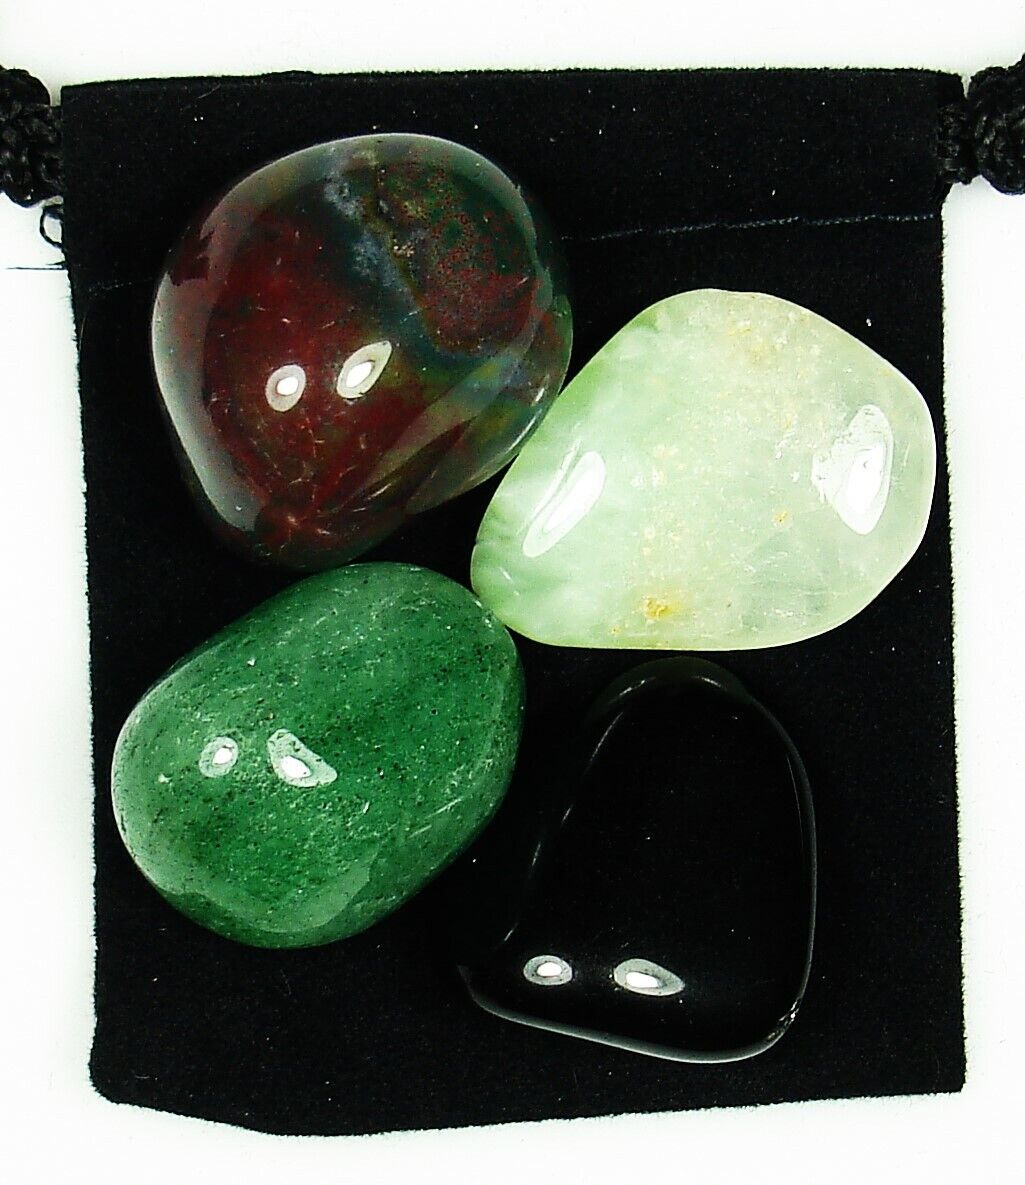 LEUKEMIA FIGHTER Tumbled Crystal Healing Set = 4 Stones + Pouch + Card